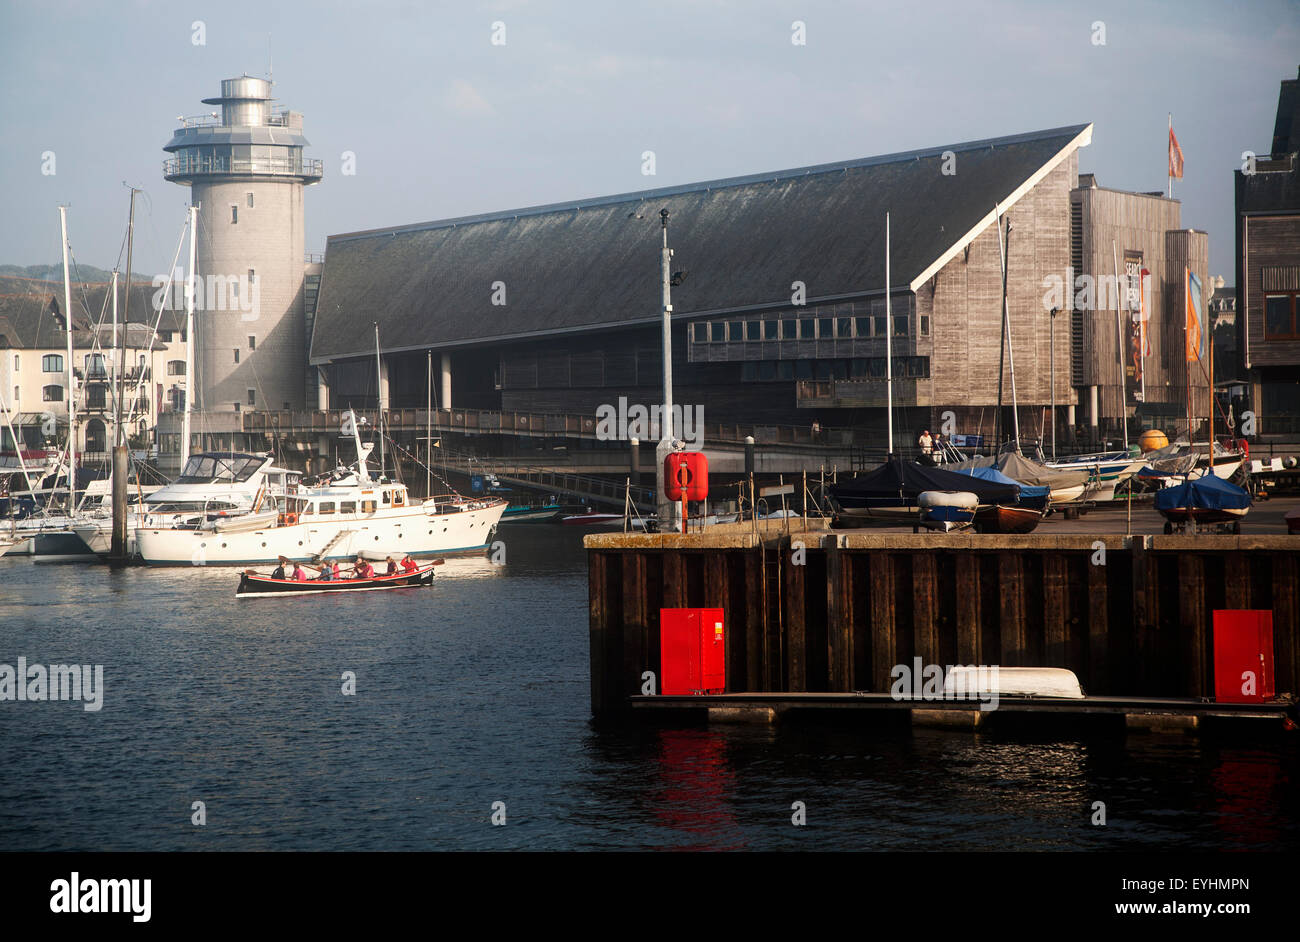 Hafen Sie, Boote und National Maritime Museum, Falmouth, Cornwall, England, UK Stockfoto